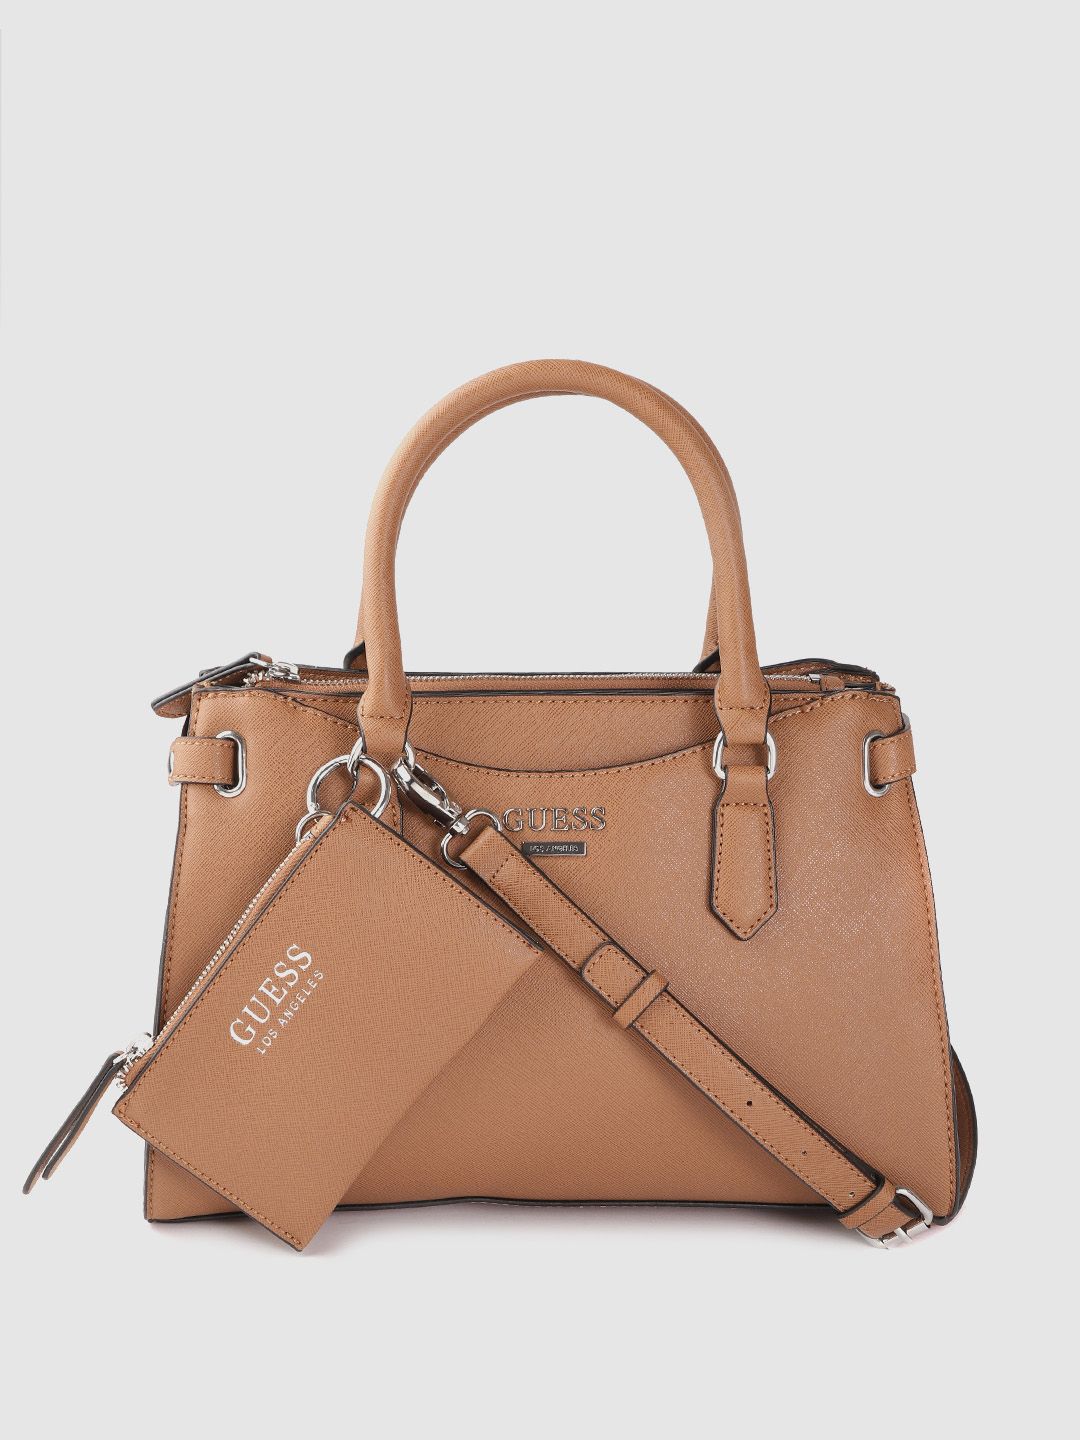 GUESS Camel Brown Saffiano Textured Handheld Bag with Pouch & Detachable Sling Strap Price in India